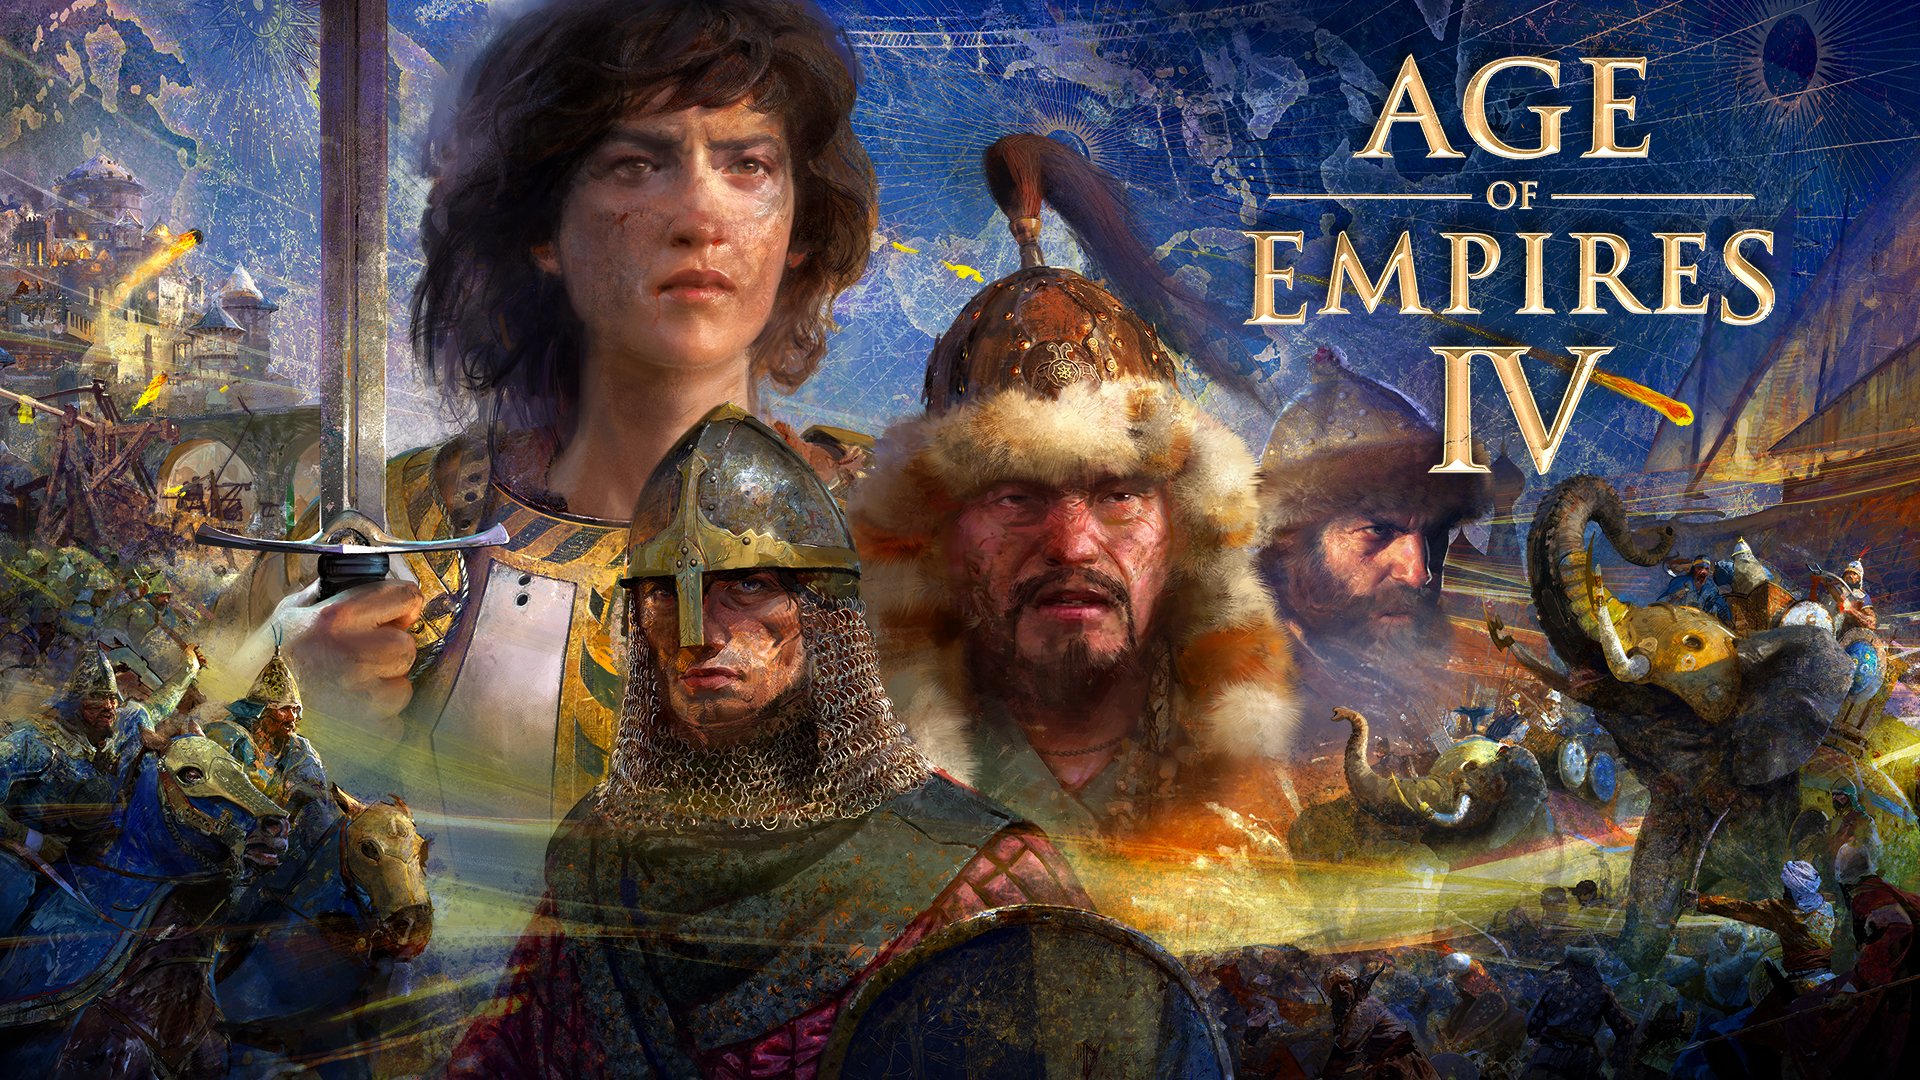 Age-of-Empires-IV